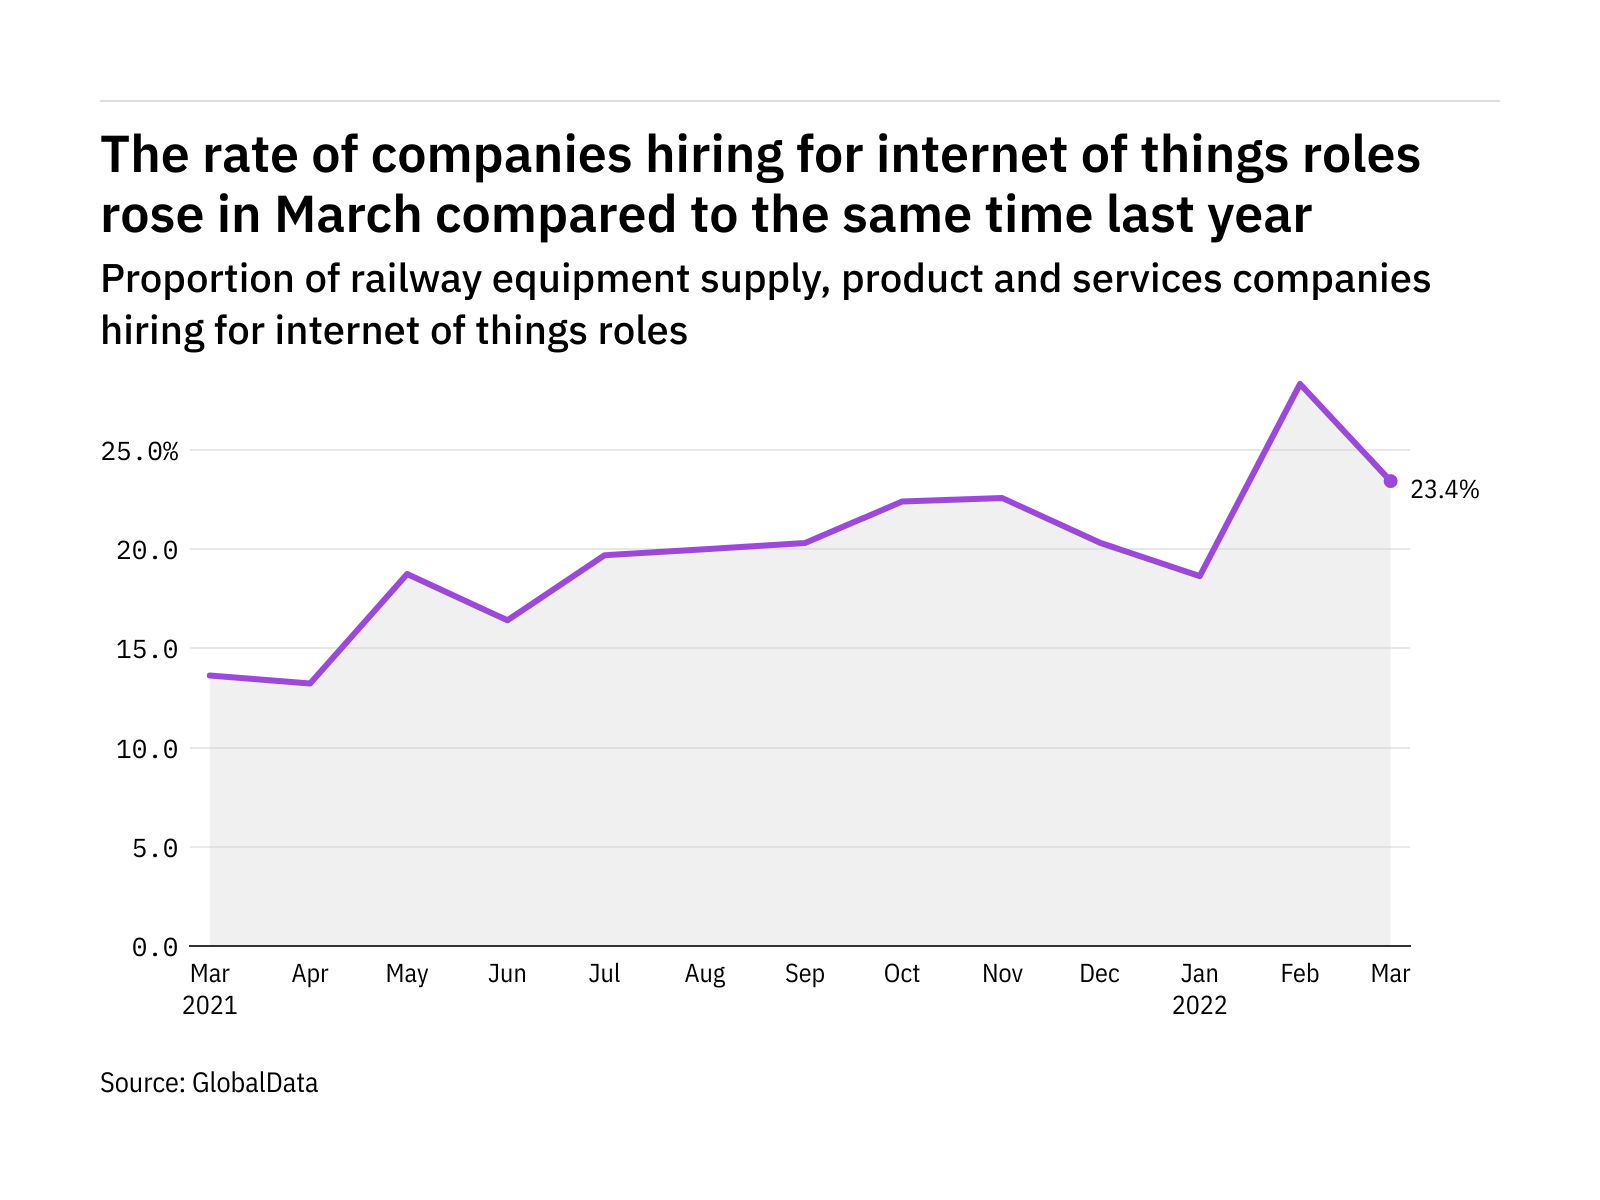 Internet of things hiring levels in the railway industry rose in March 2022